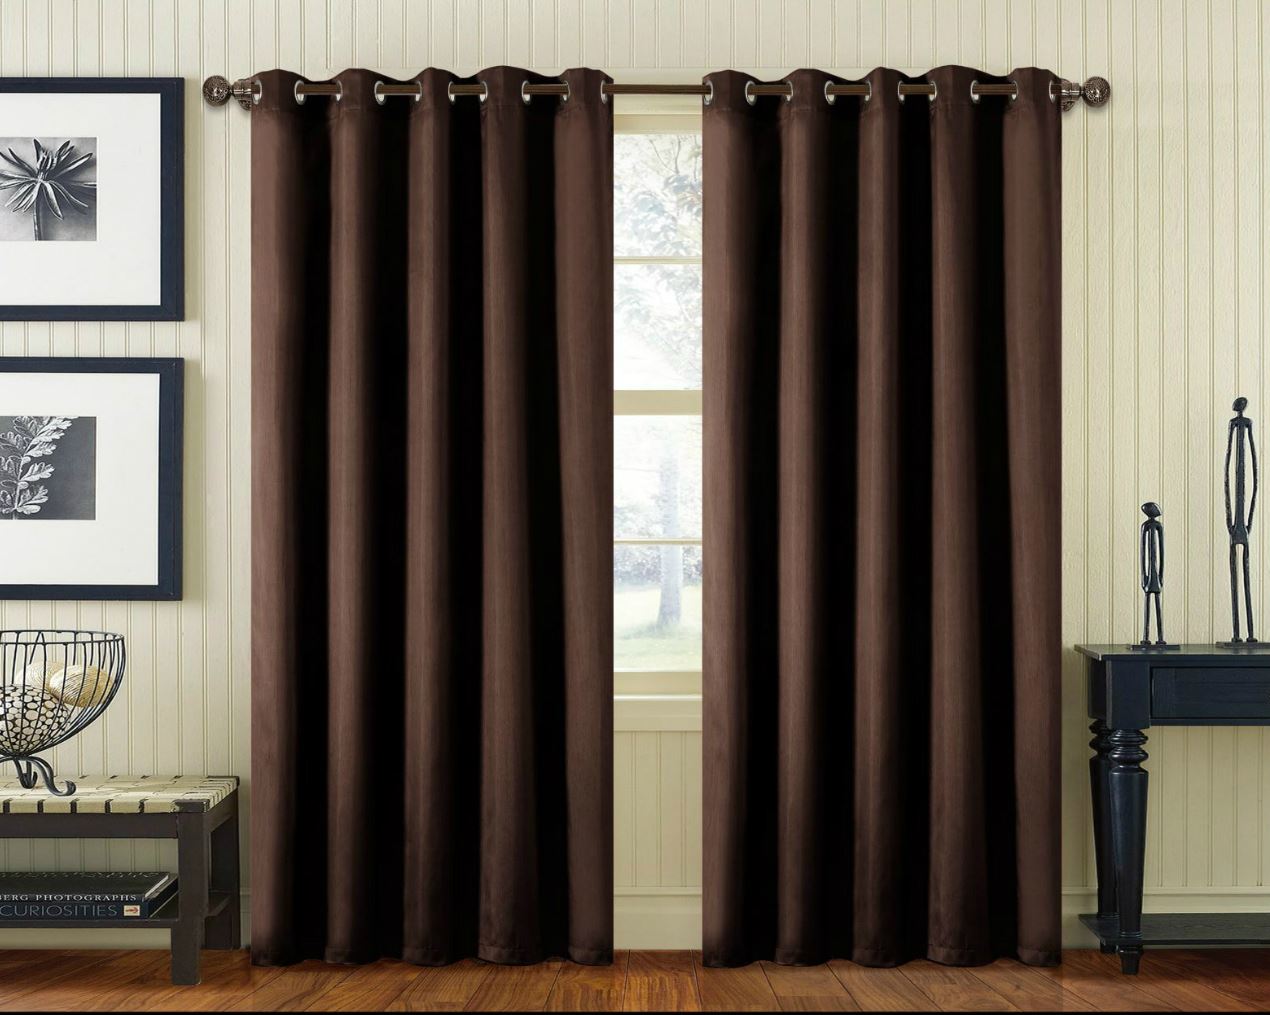 Add a Touch of Elegance with Faux Silk Curtain Panels